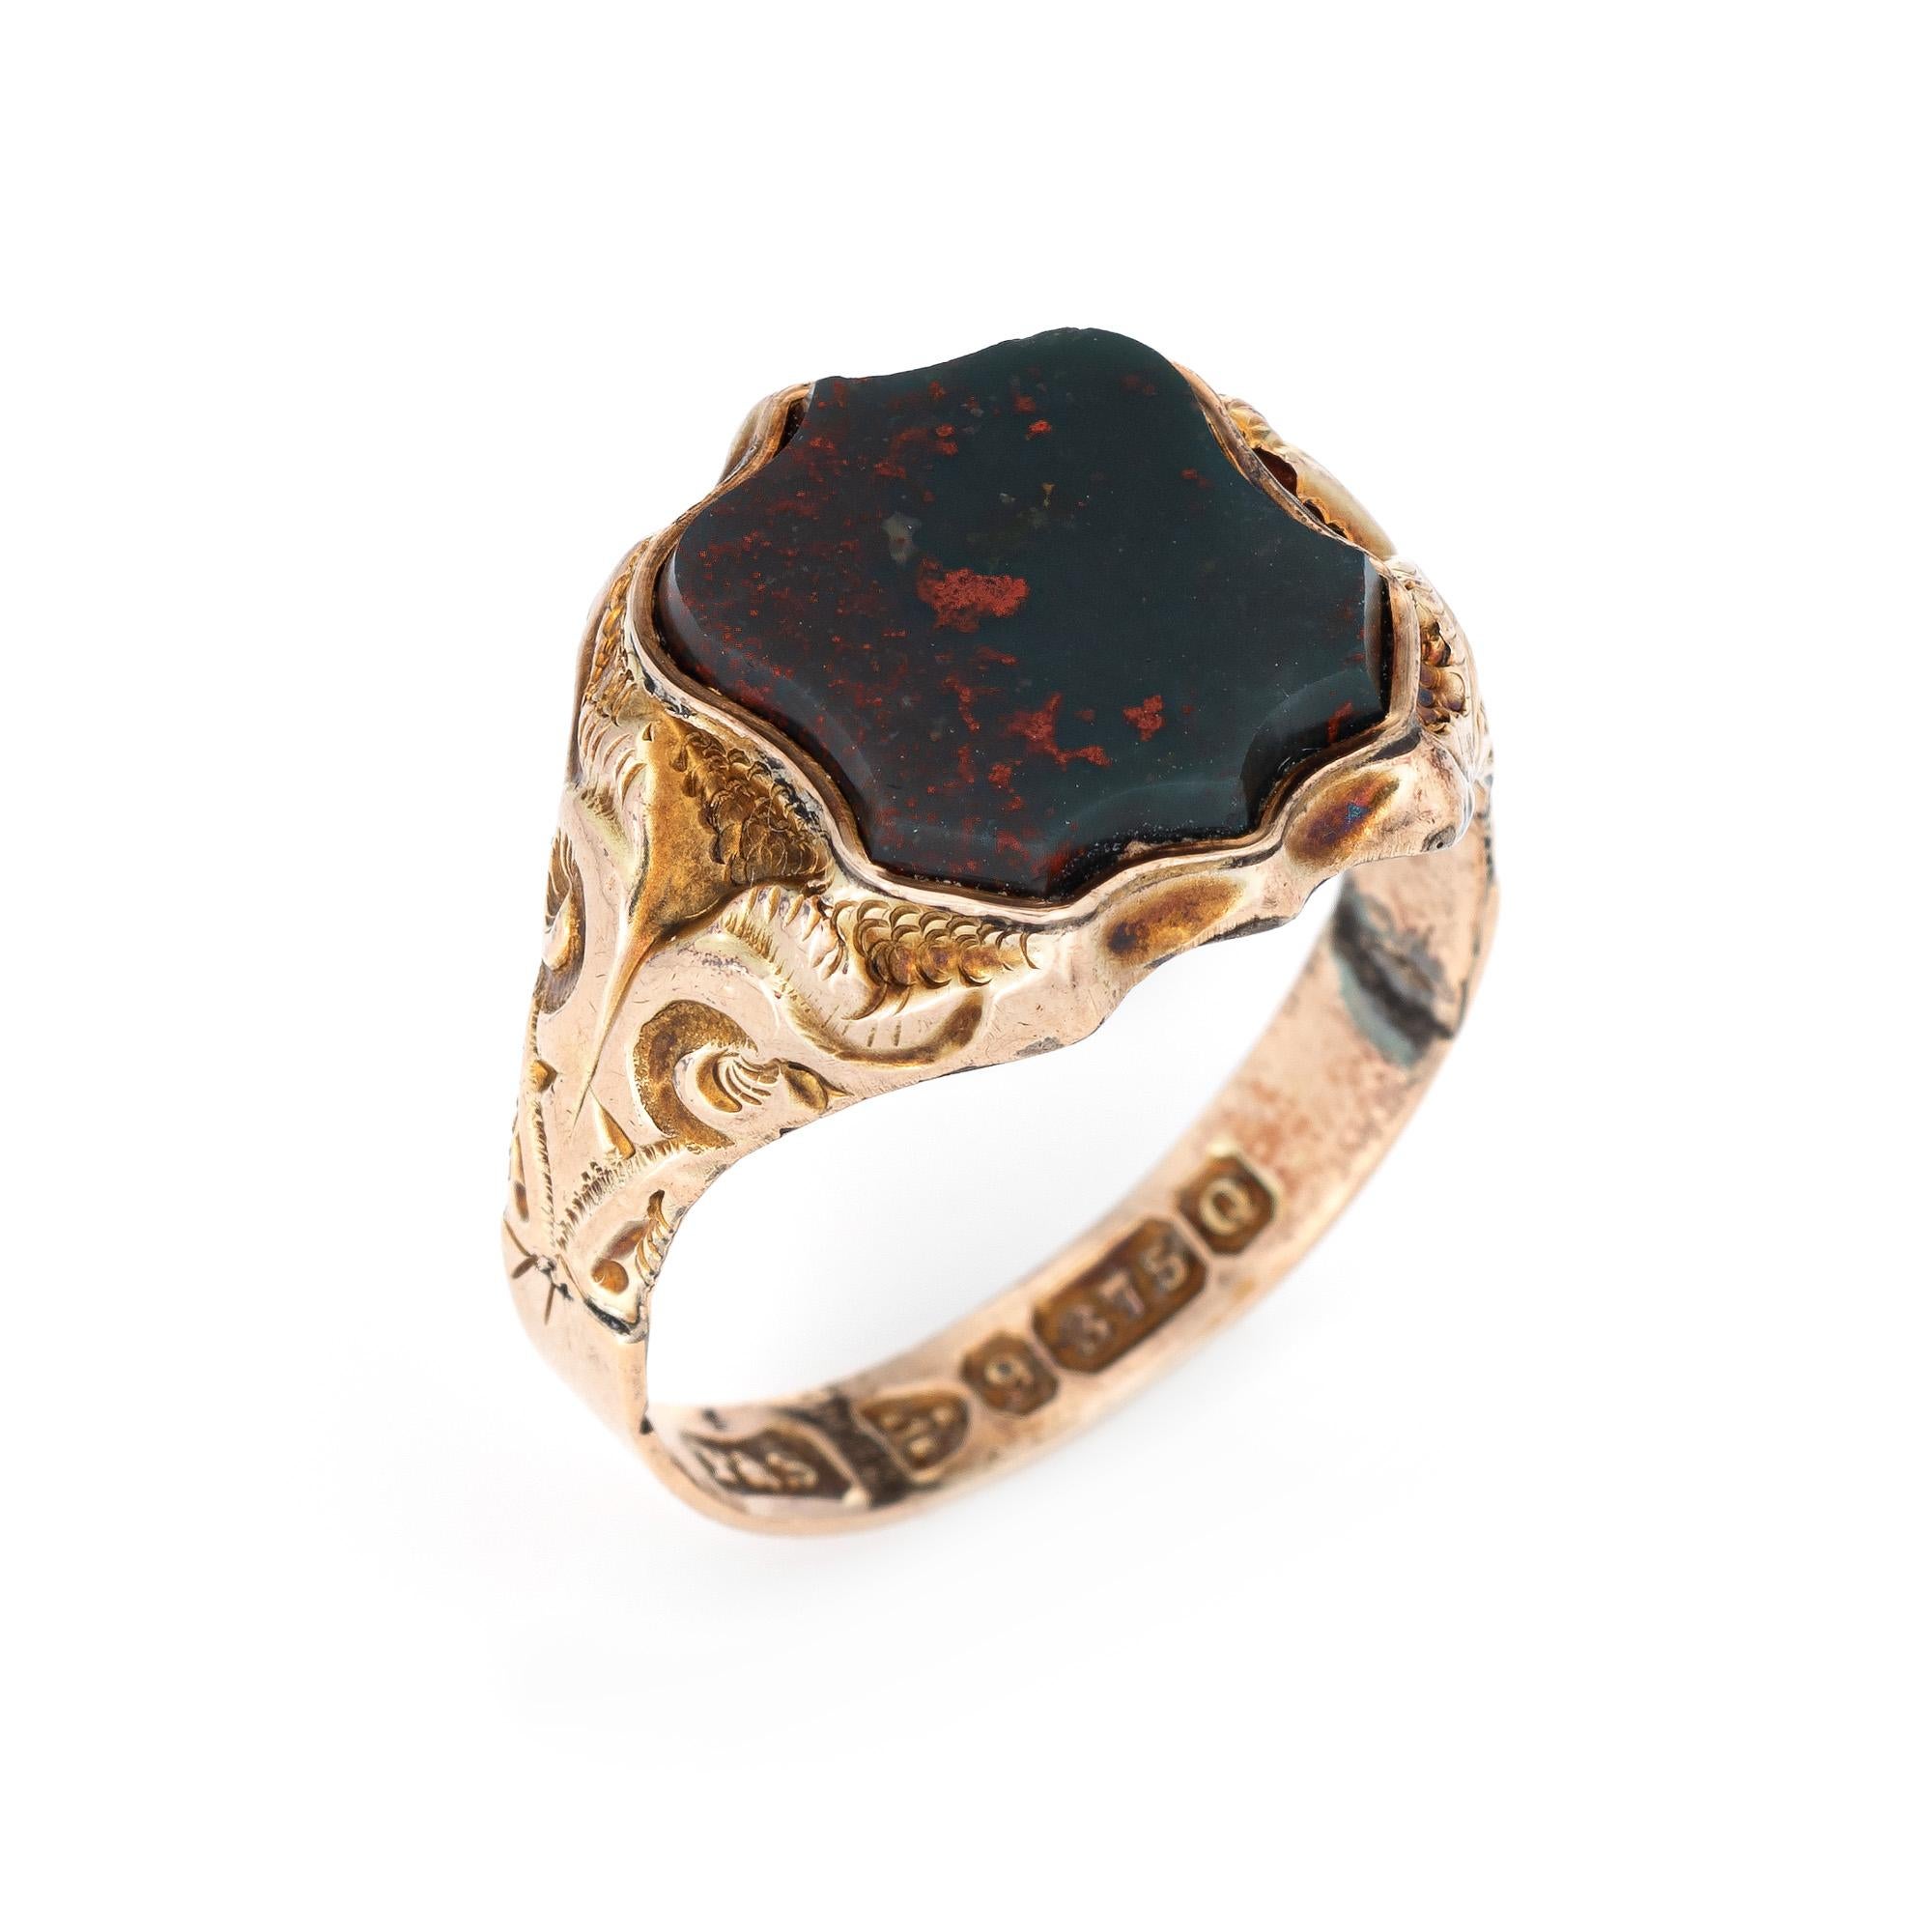 Finely detailed antique Victorian bloodstone shield ring (circa 1899), crafted in 9 karat rose gold. 

The bloodstone measures 12mm x 10mm (in good condition with a small nick to the stone, visible under a 10x loupe)
The bloodstone is cut into a